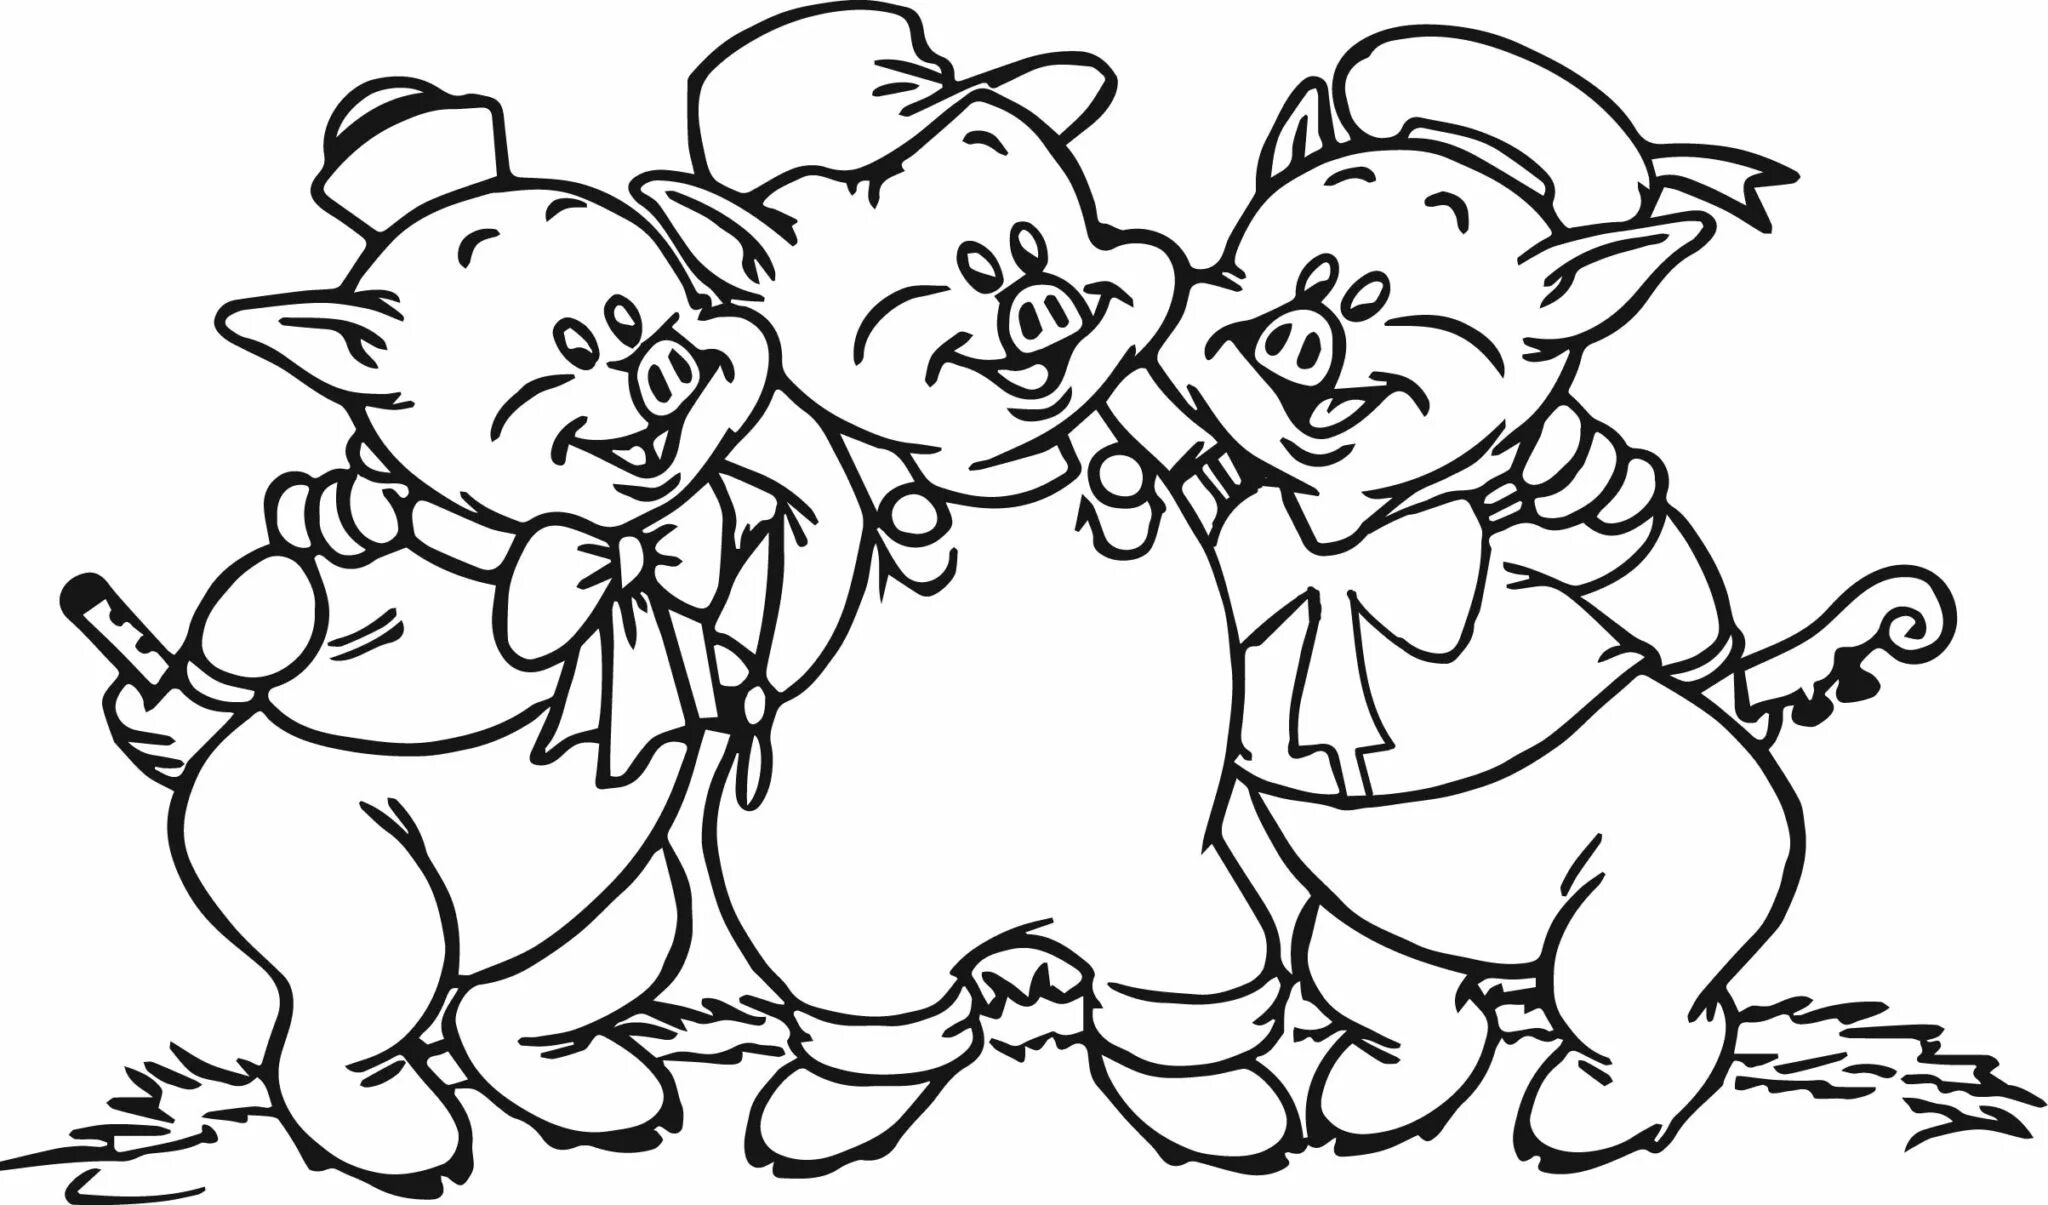 Blissful coloring 3 little pigs for kids